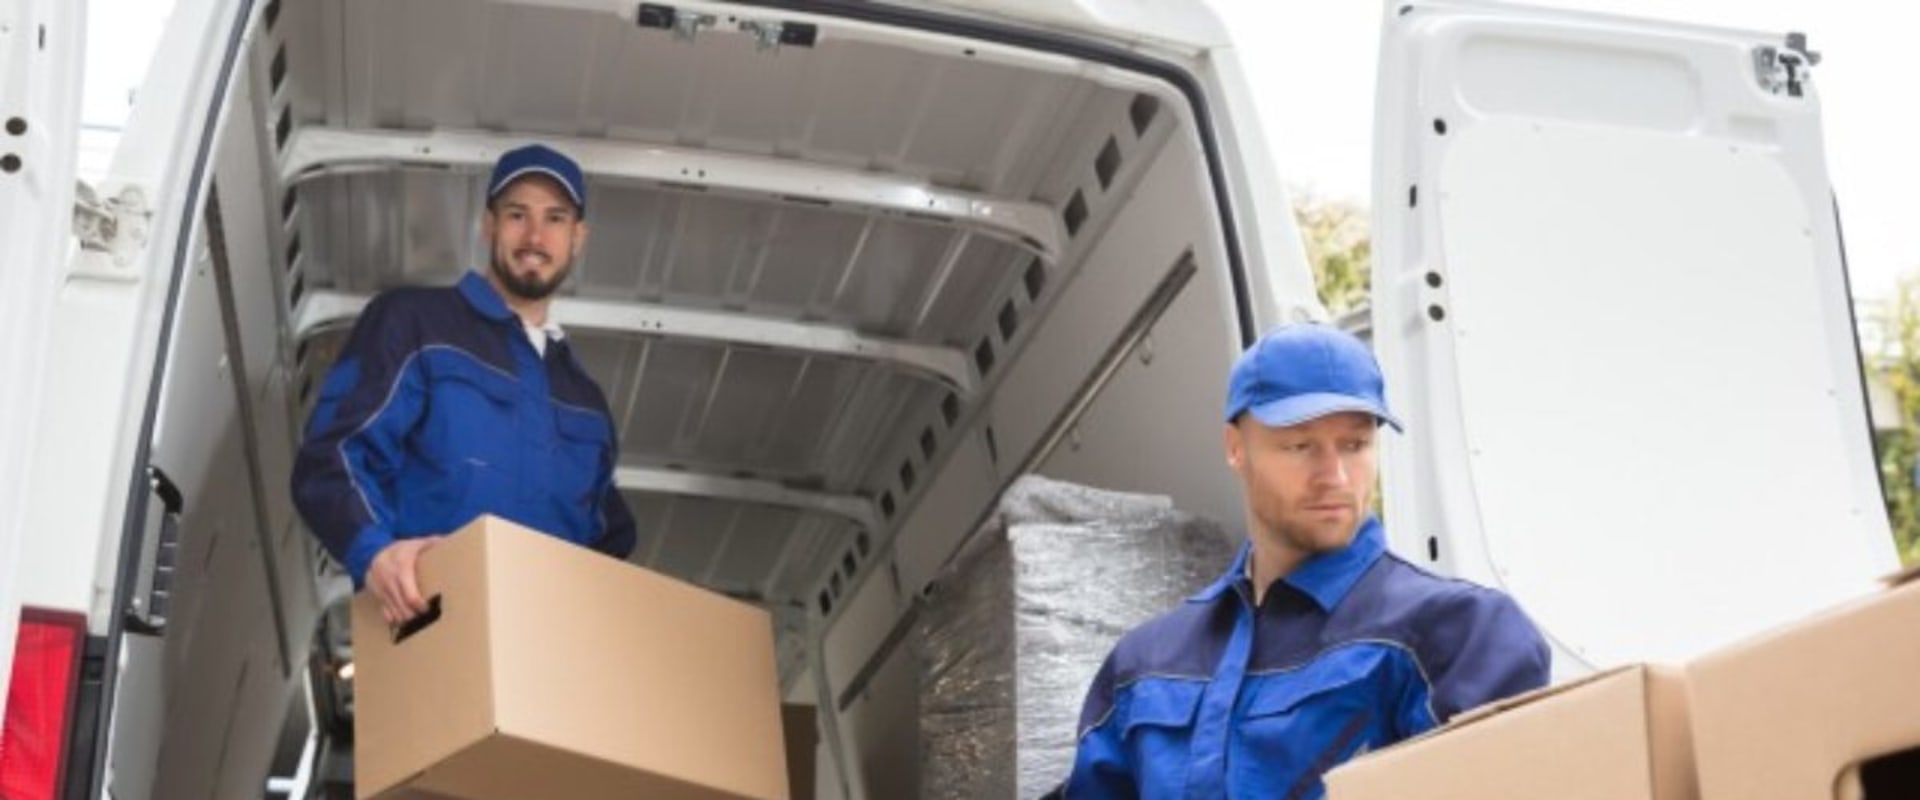 What day is cheapest to hire movers?